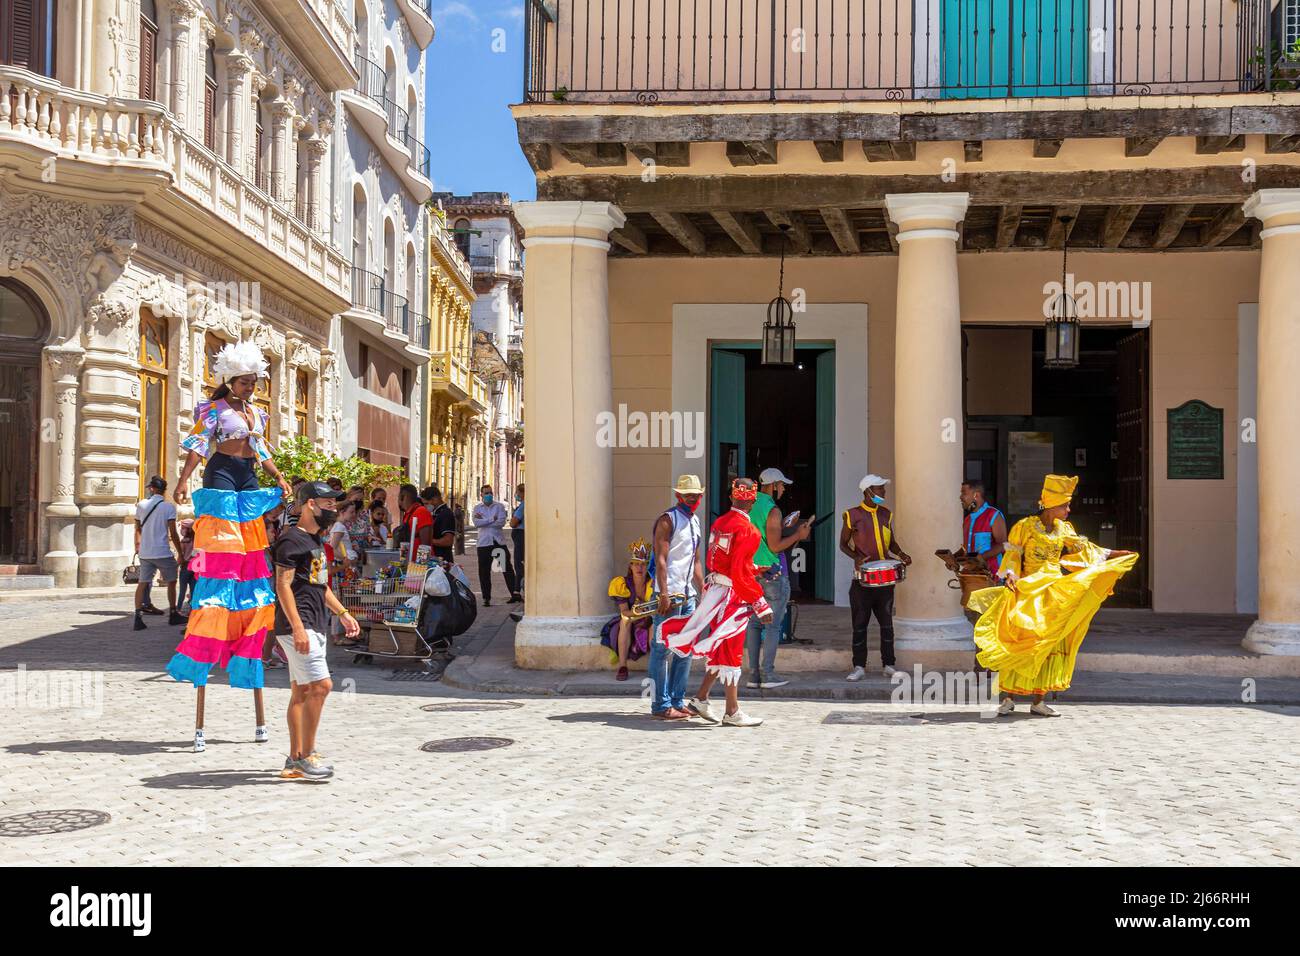 Conga dancers in stilts performing in Old Havana. They are wearing colorful traditional clothing. Stock Photo